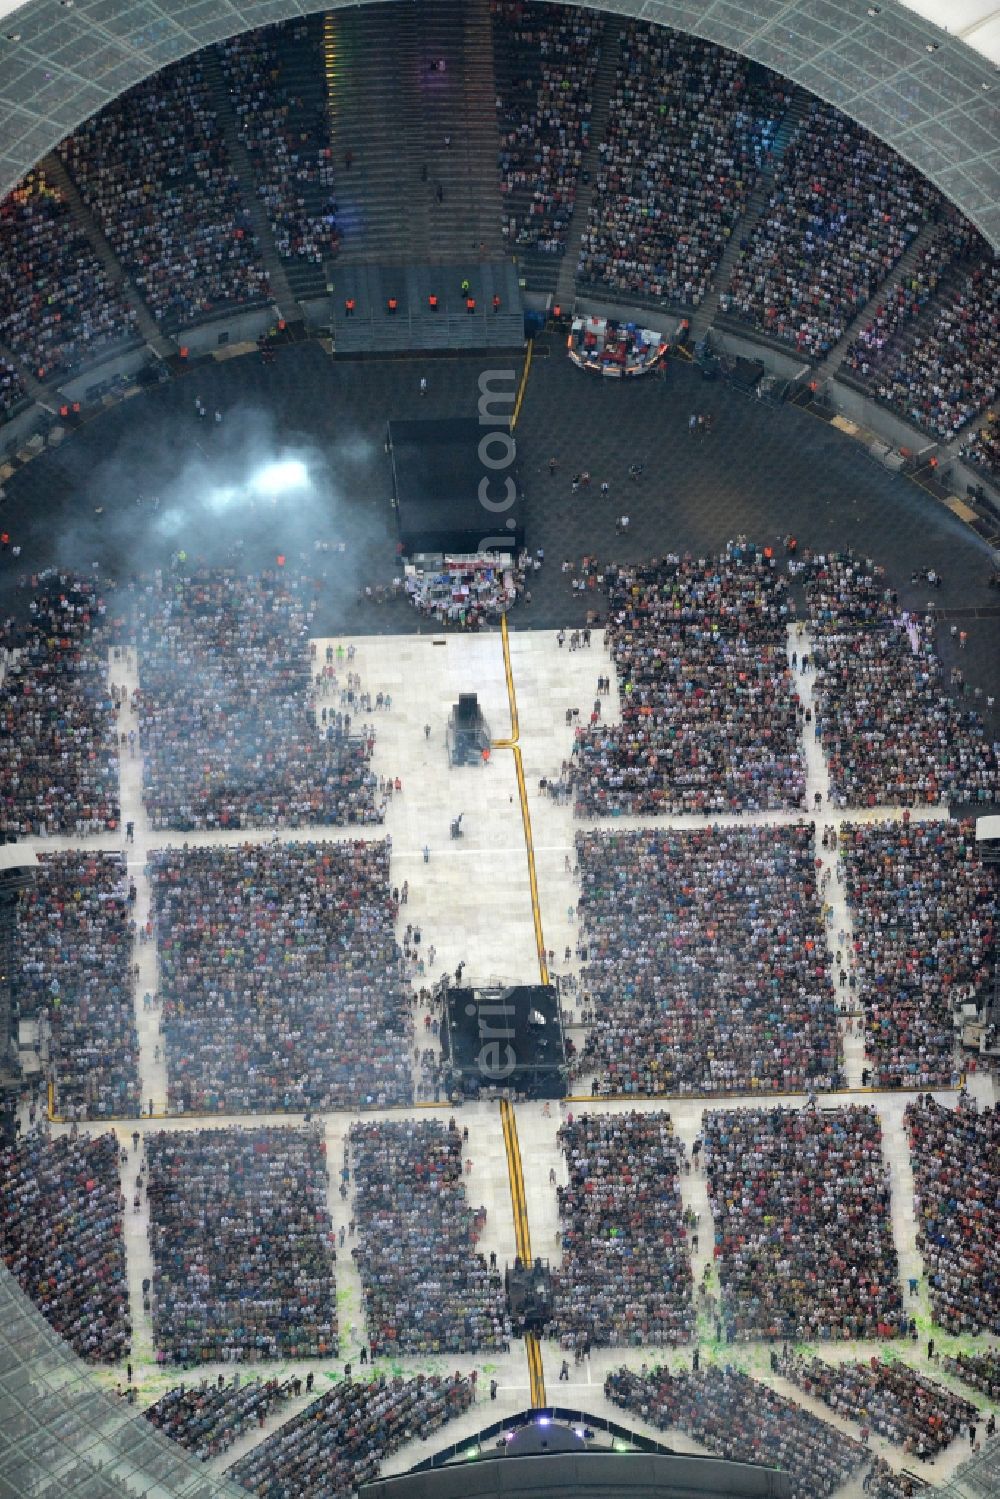 Berlin from above - Helene Fischer - Music concert in the grounds of the Arena olympic stadium in Berlin in Germany